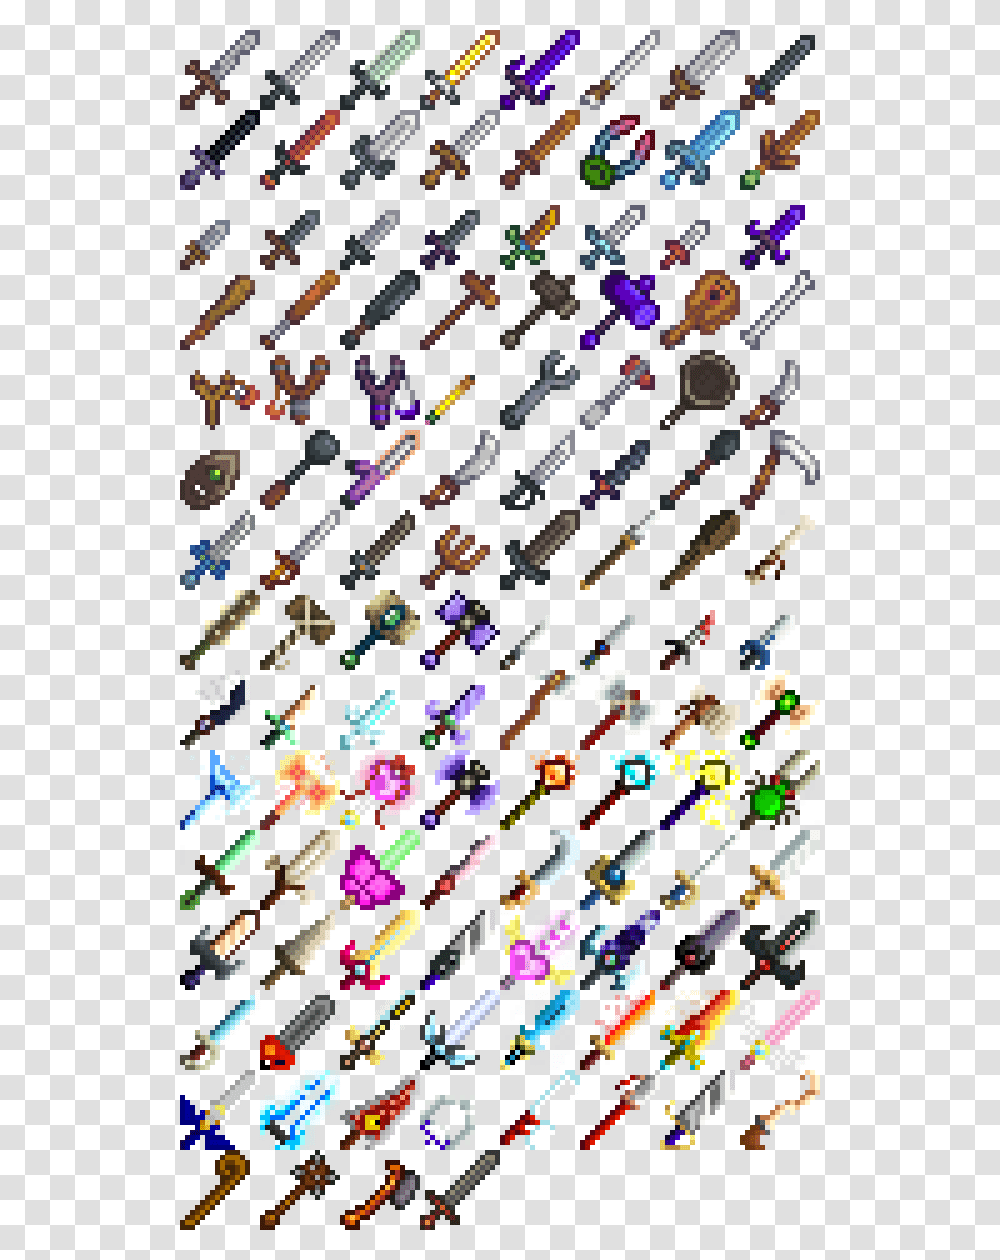 Stardew Valley Mod Weapon, Paper, Confetti, Christmas Tree, Ornament Transparent Png